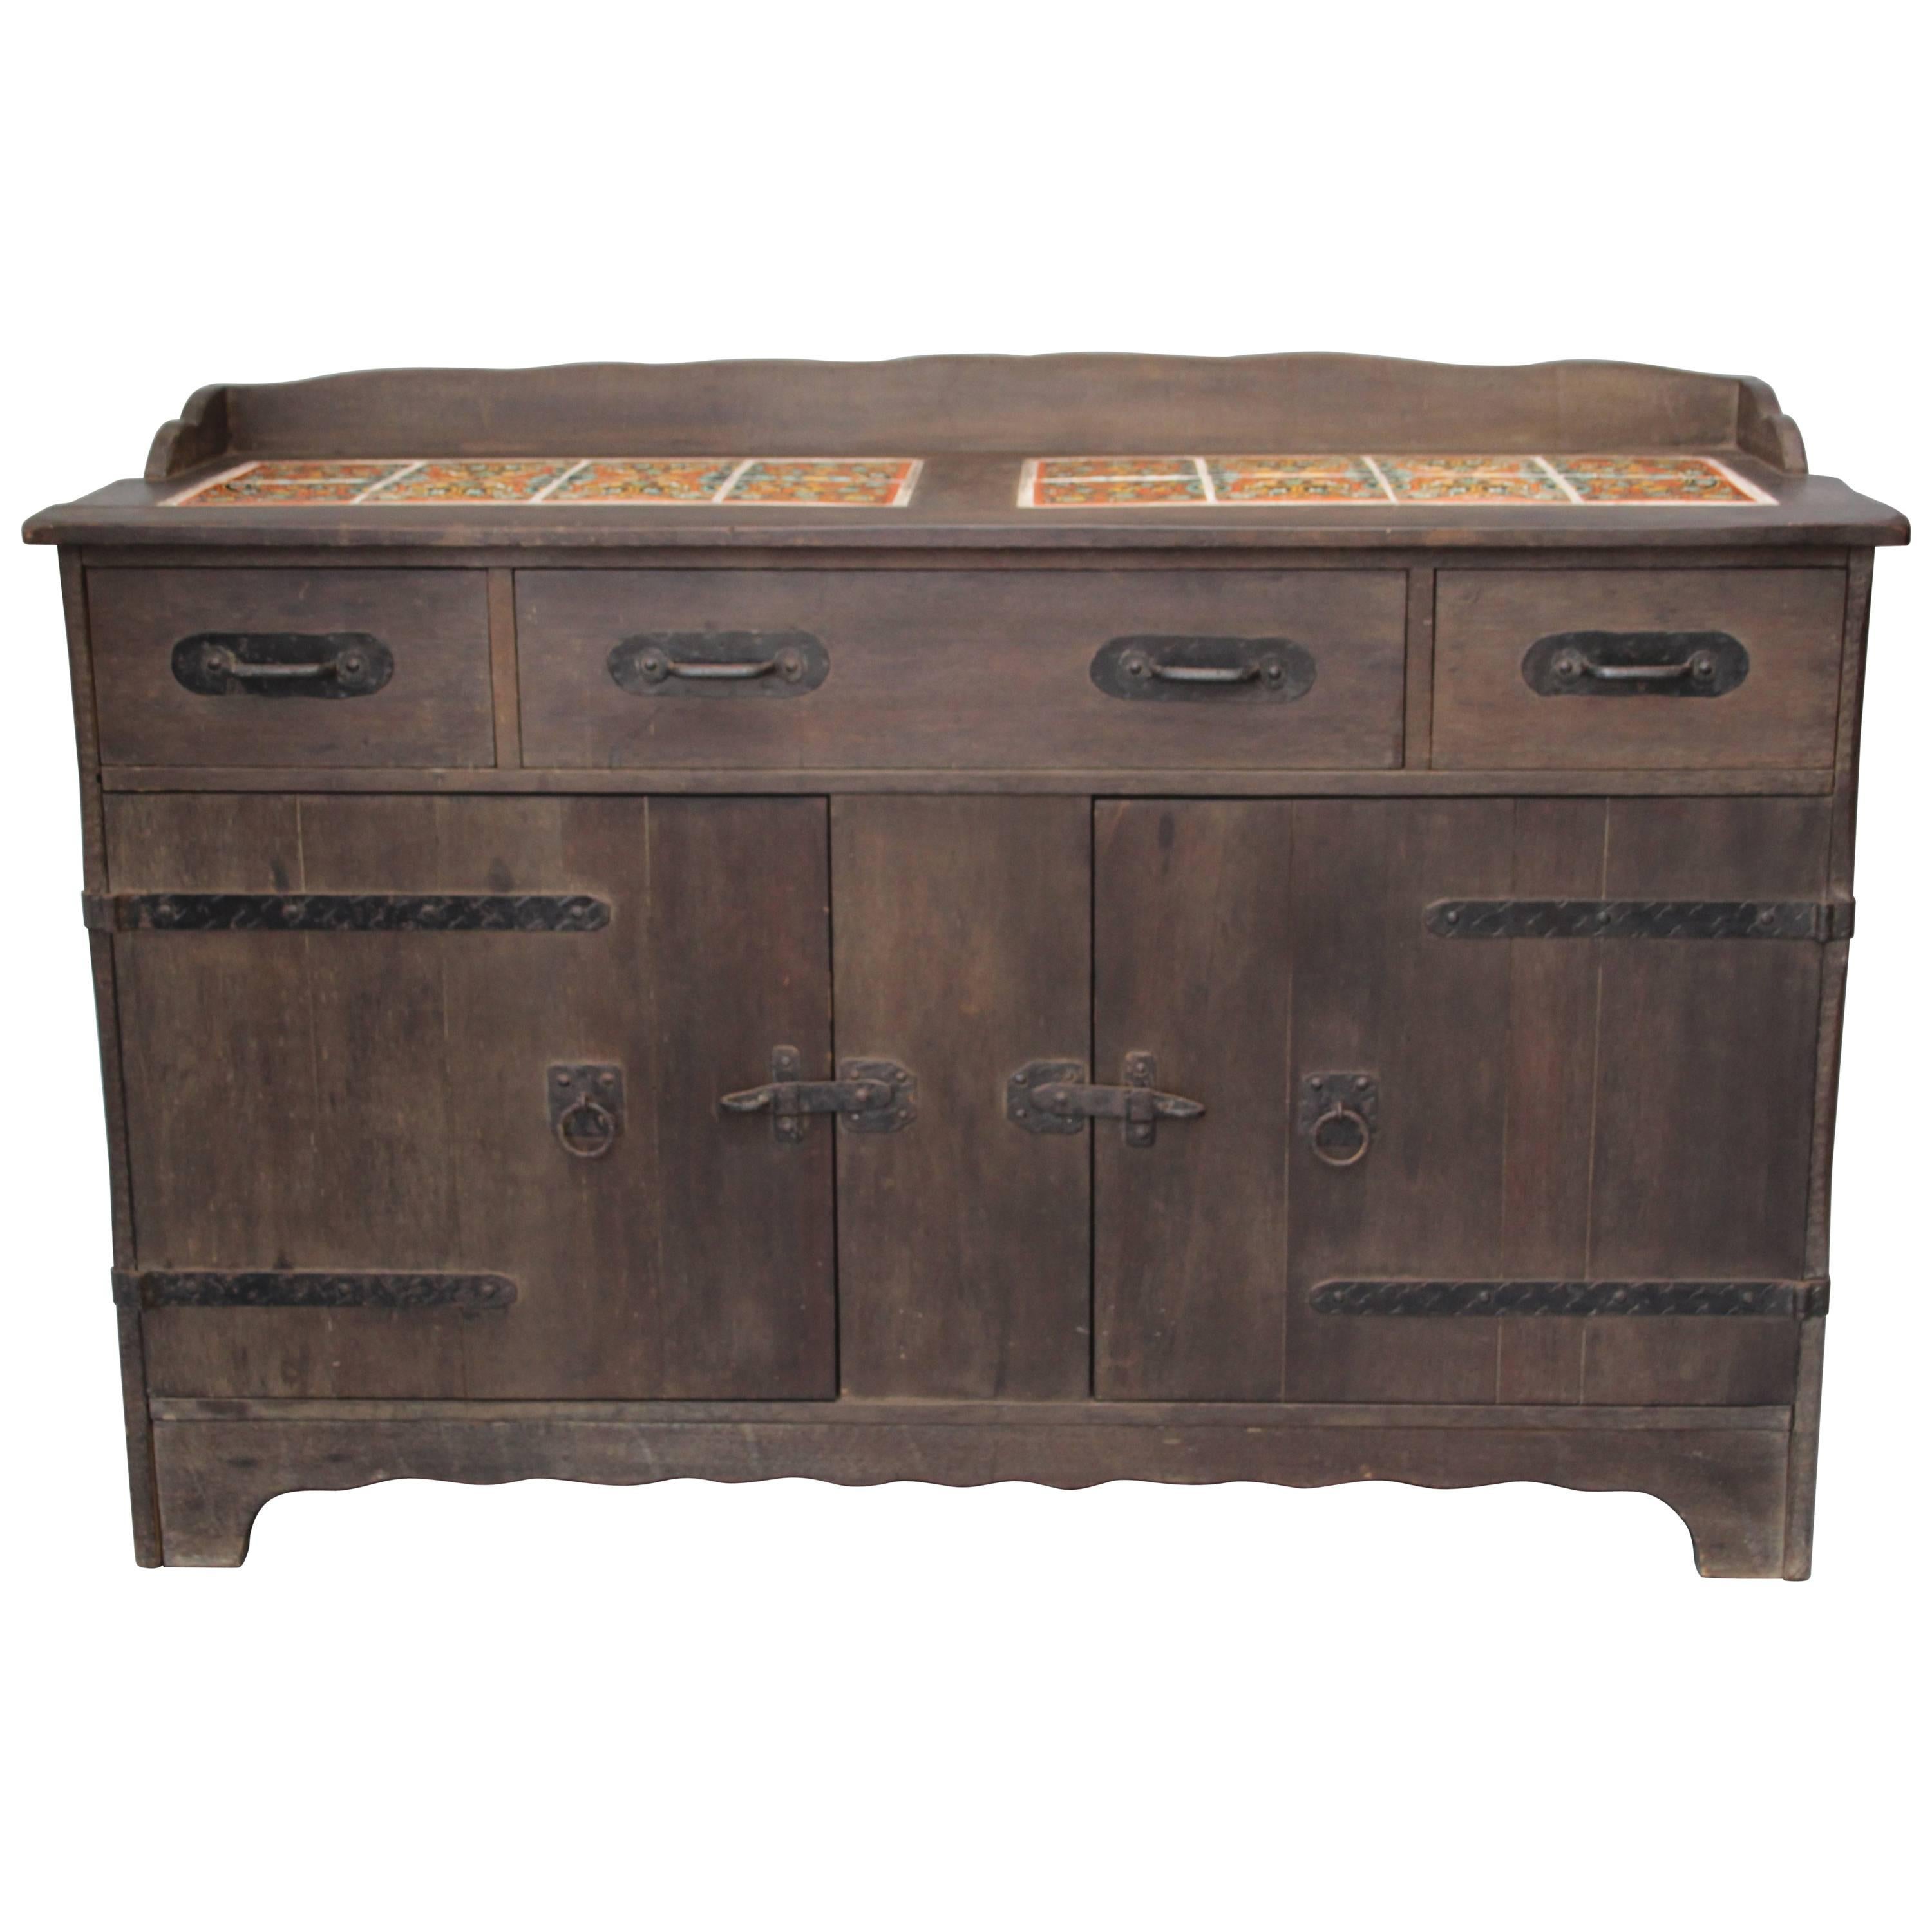 1930s Monterey 16 Tile-Top Sideboard Buffet in Original Old Wood Finish